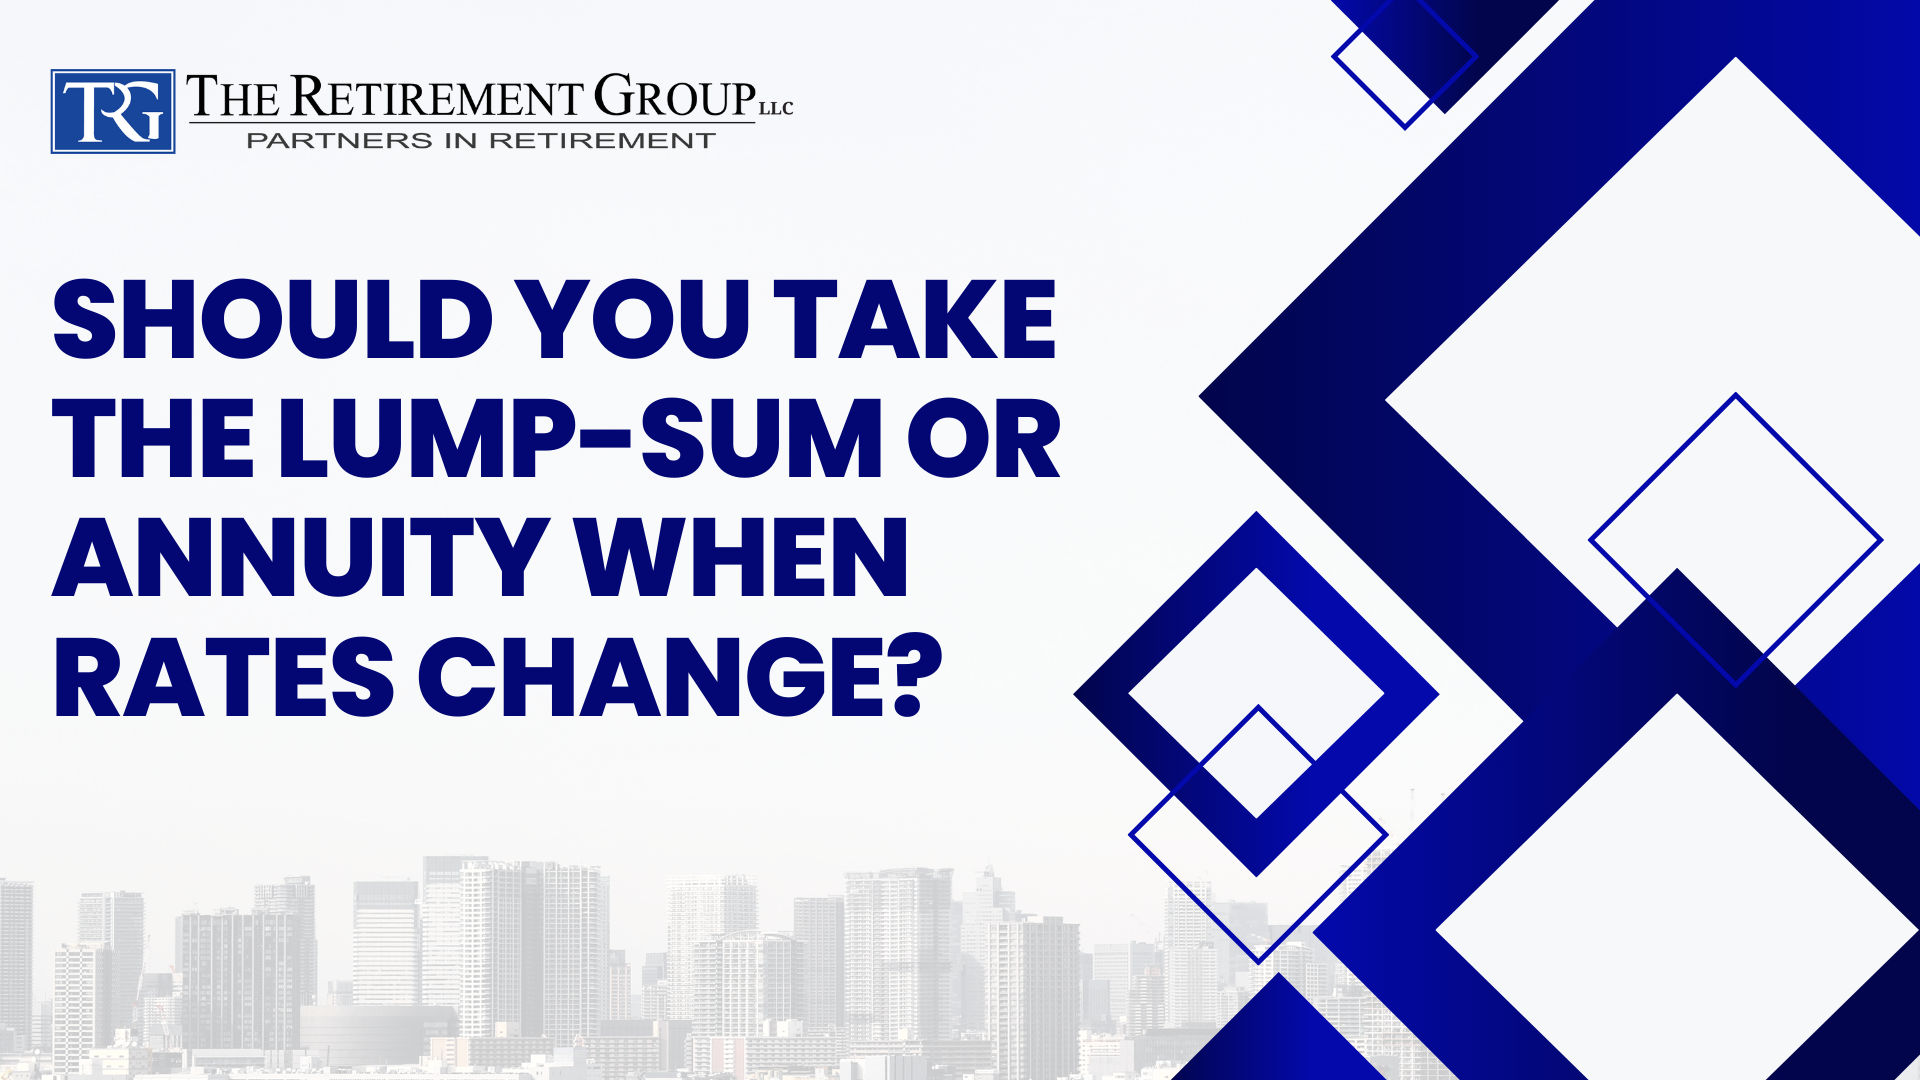 Should You Take the Lump-Sum or Annuity When Rates Change?